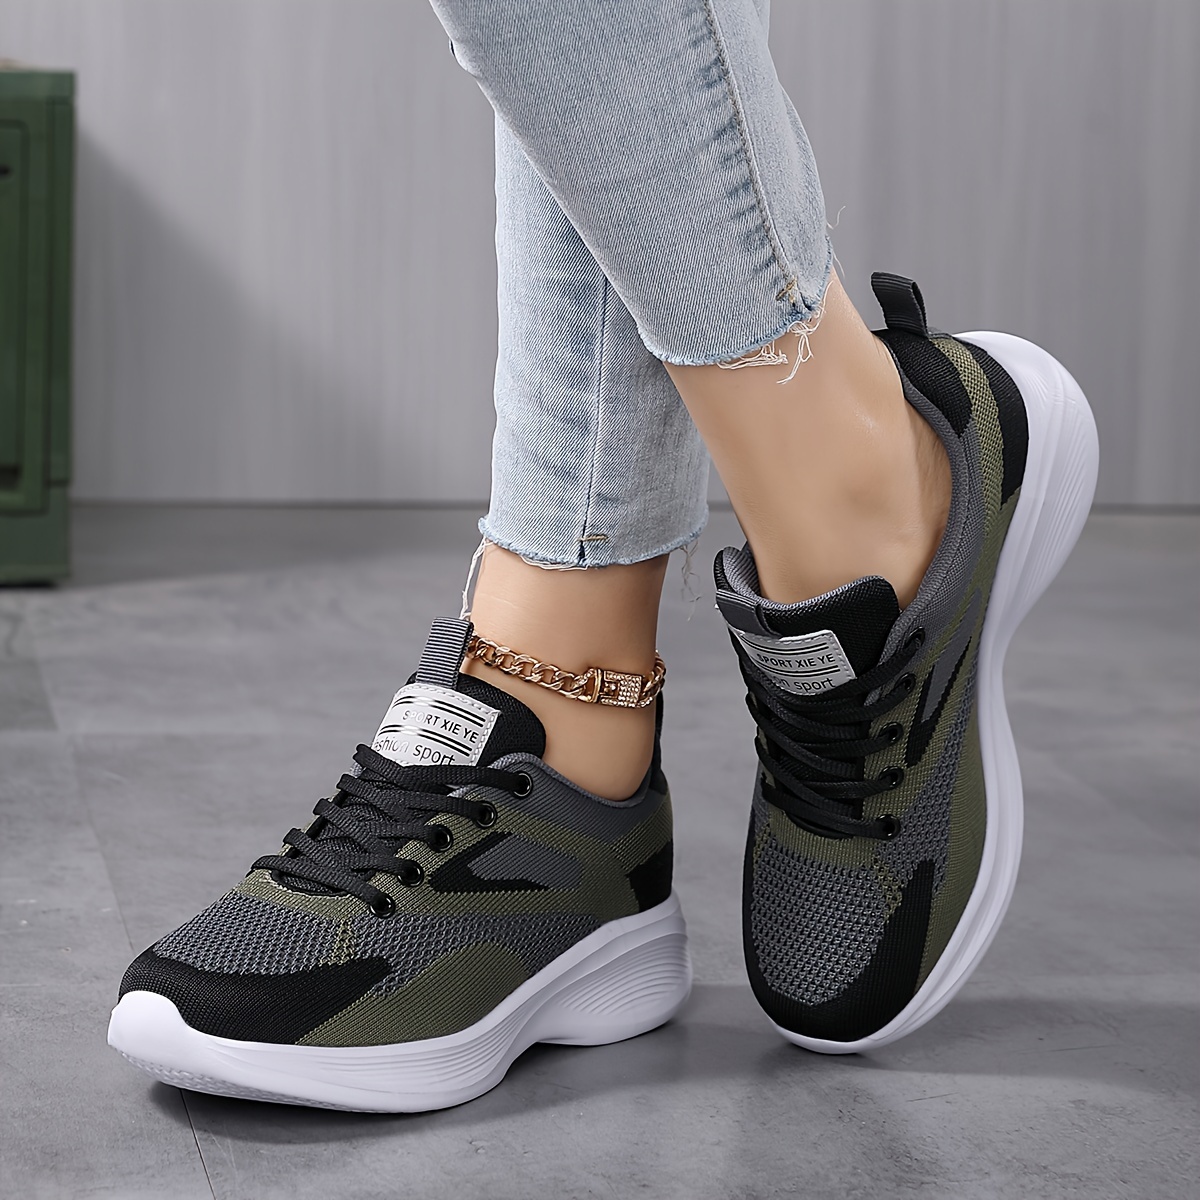 womens breathable flying woven platform sneakers casual lace up outdoor shoes comfortable low top running shoes details 1